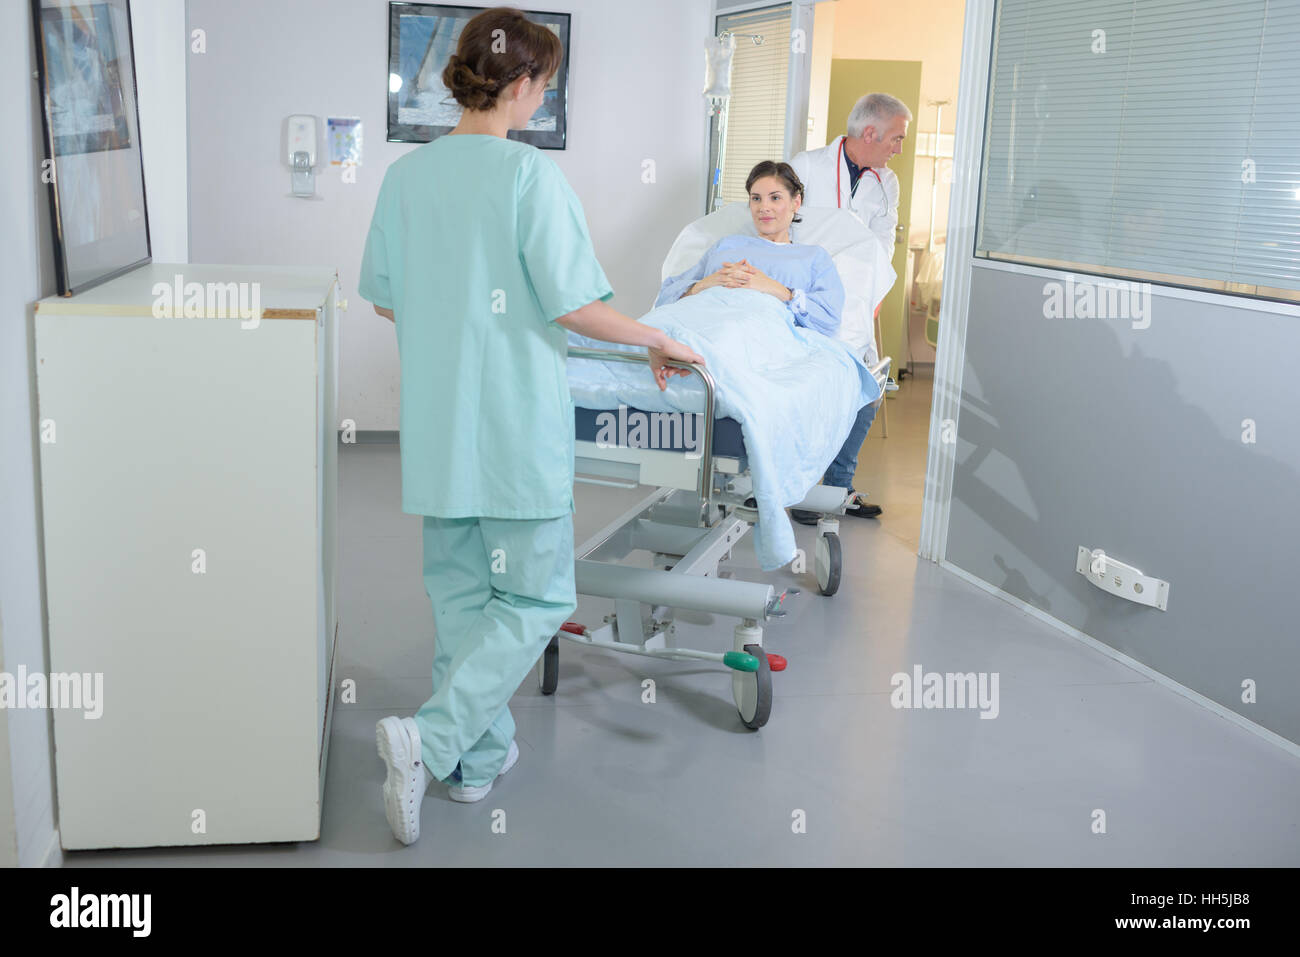 Patient being wheeled on hospital stretcher Stock Photo